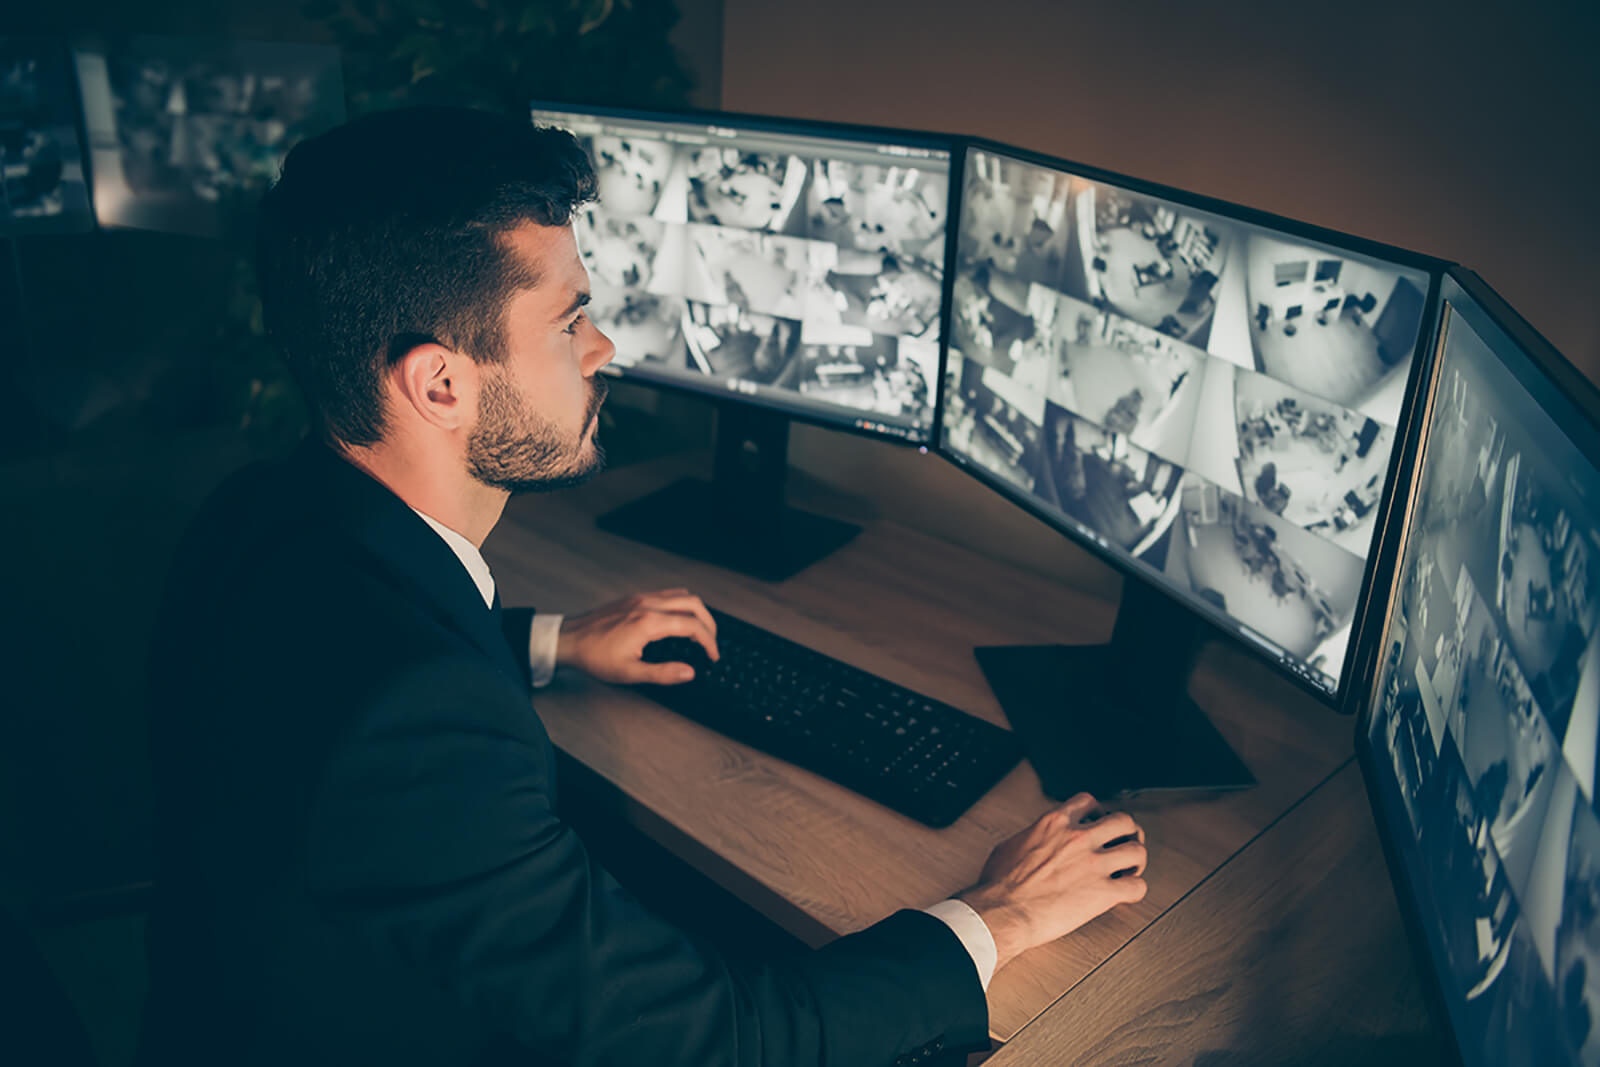 Remote-Video-Monitoring-worker-looking-at-screens (1)